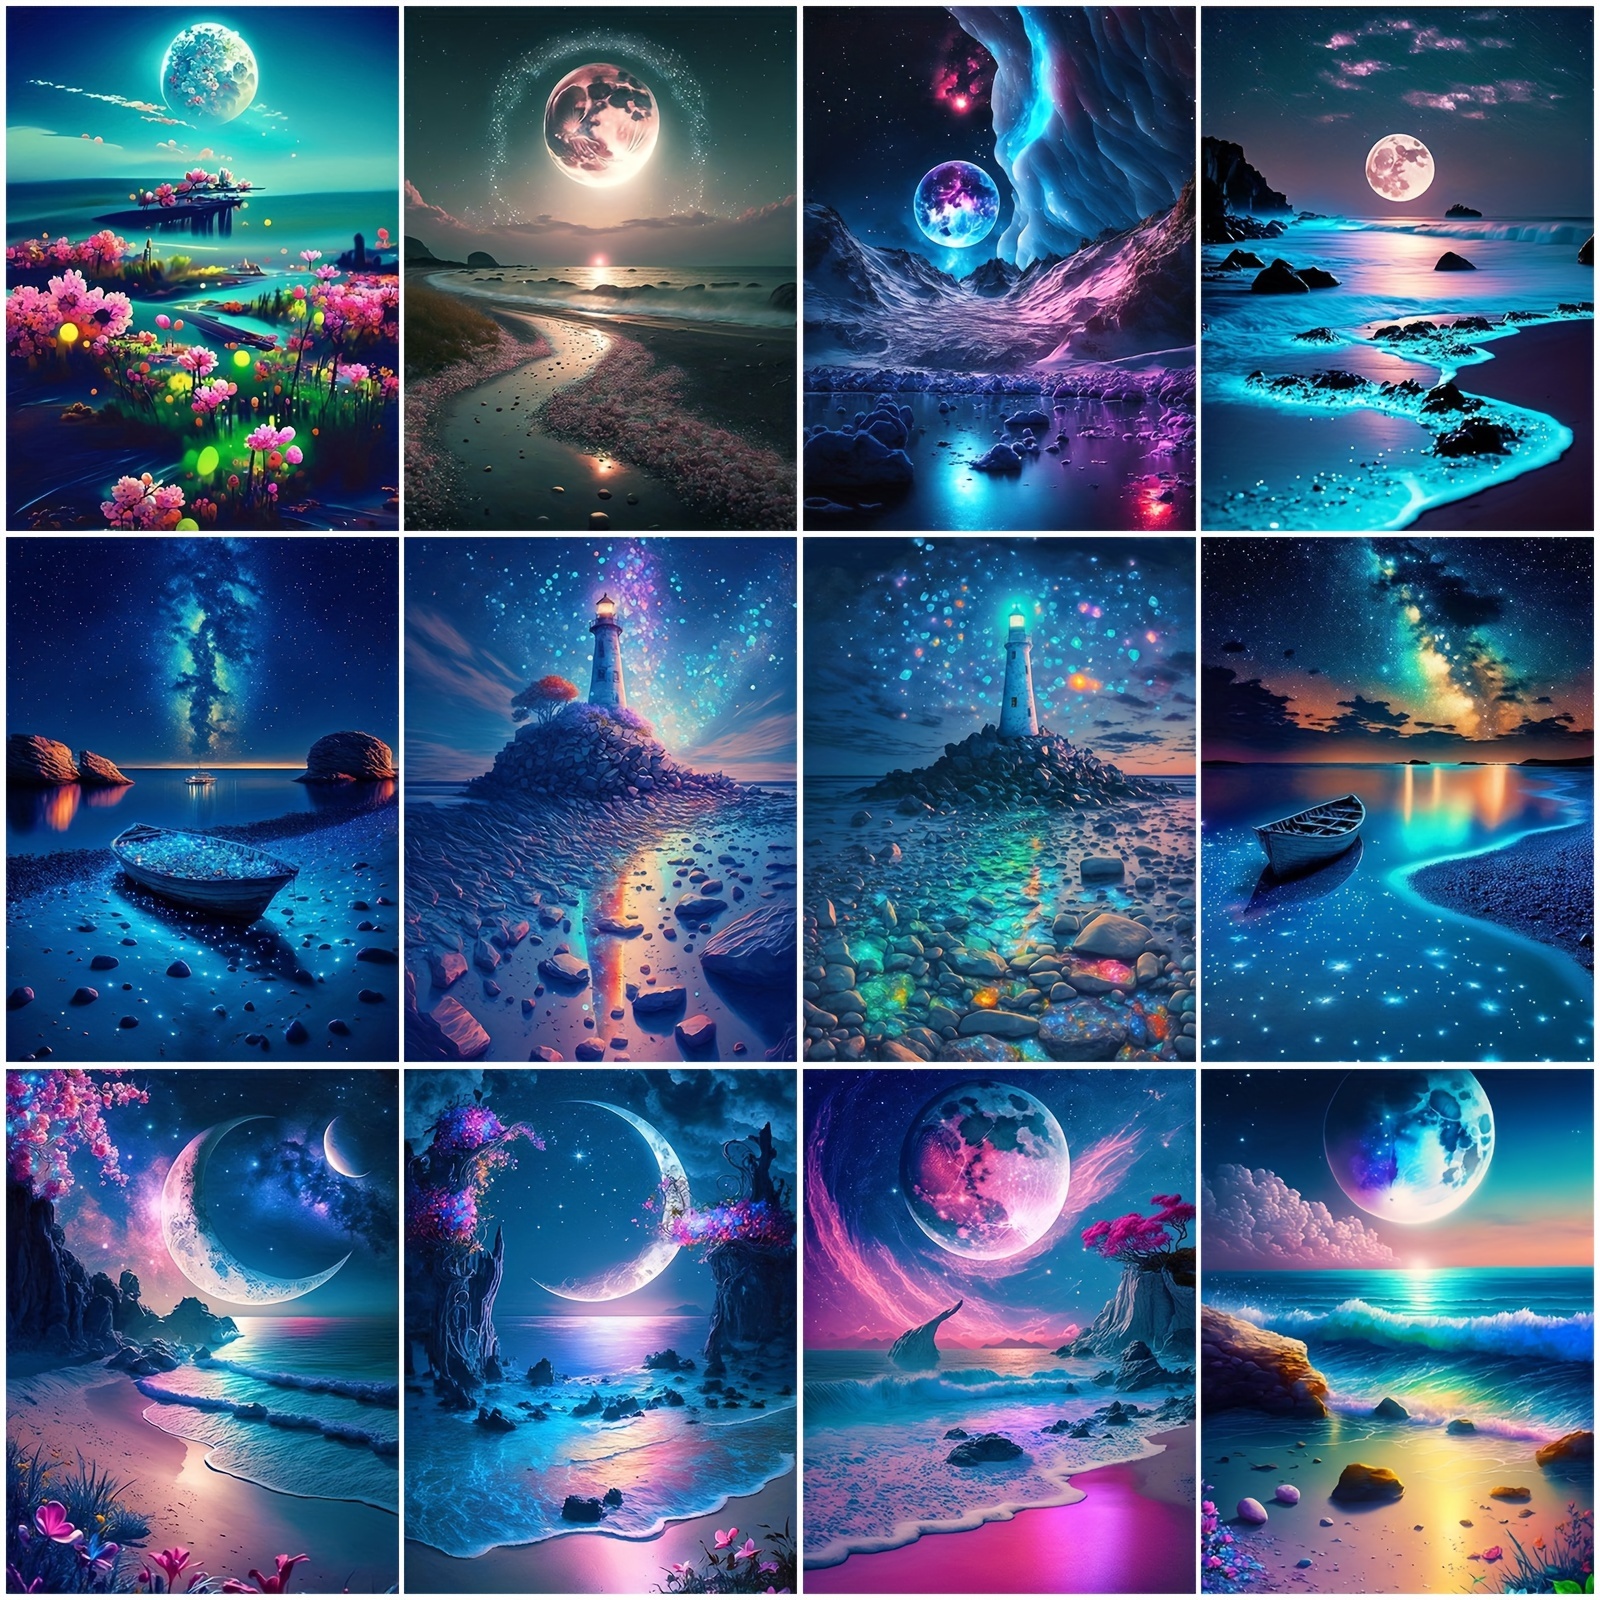 

4pcs Diy 5d Diamond Painting Kits For Adults Landscape Scenery Diamond Gem Art Beads Painting Adult Wall Decor For Adults Home Decor (7.9x9.8 Inches)